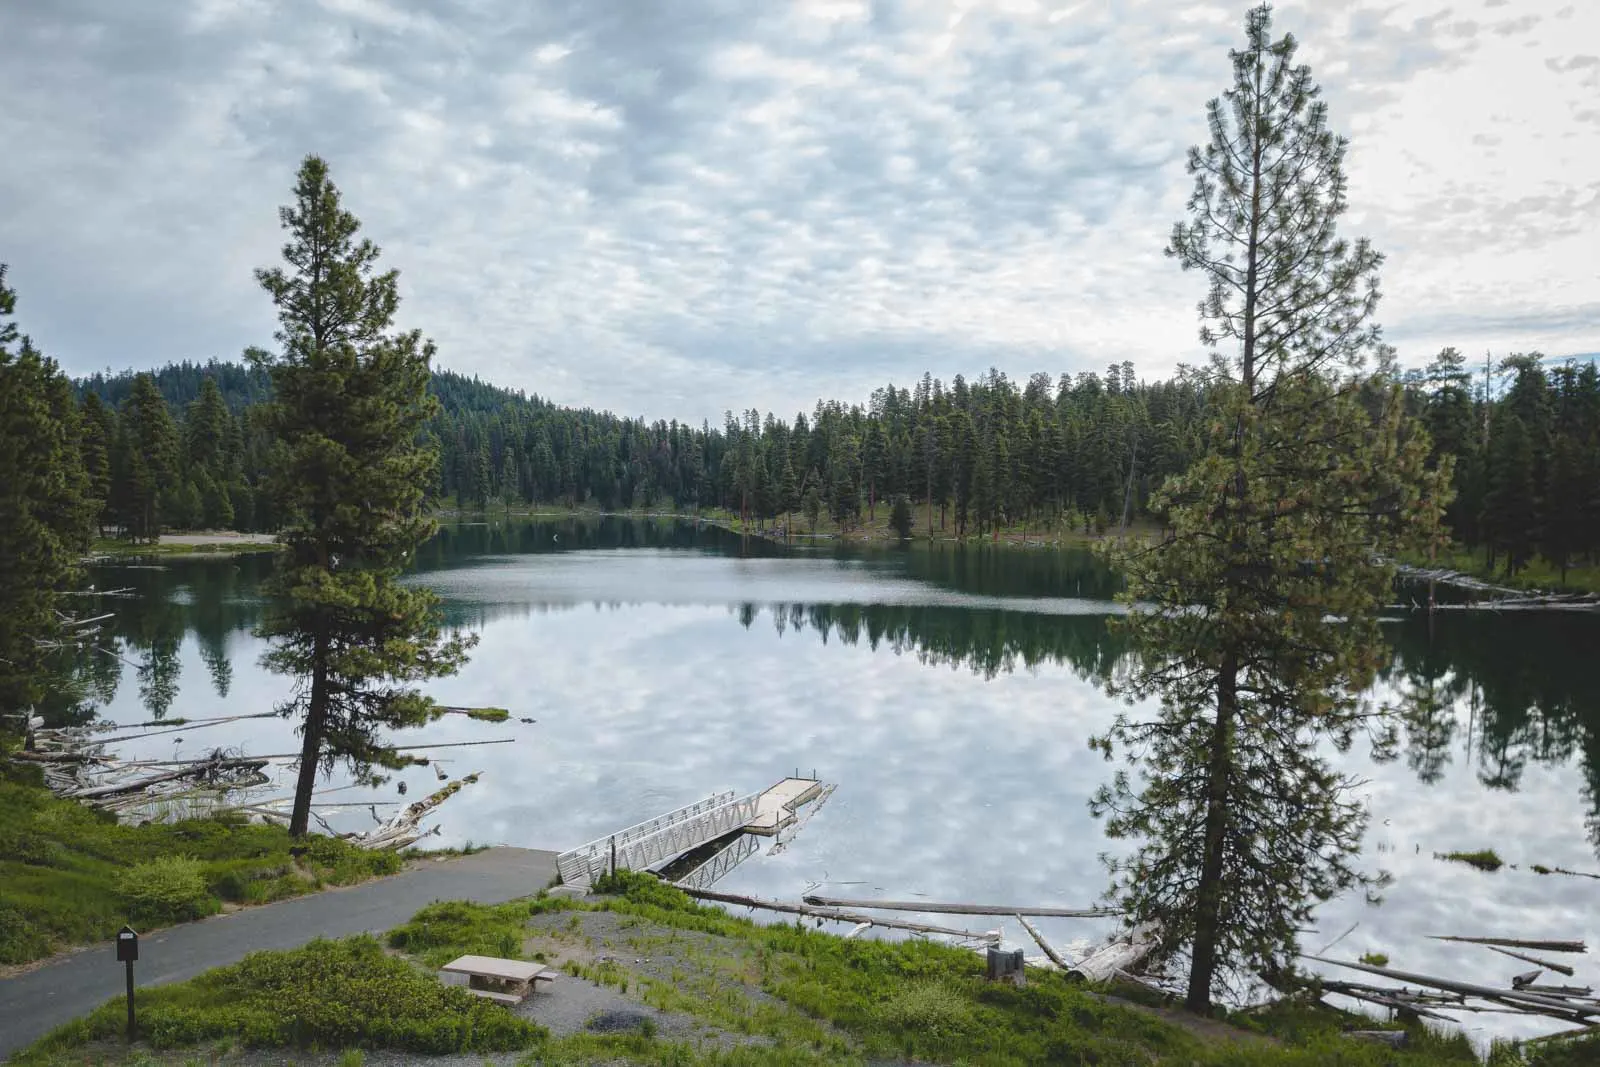 Don't forget to visit Magone Lake when you're at Strawberry Mountain Wilderness.